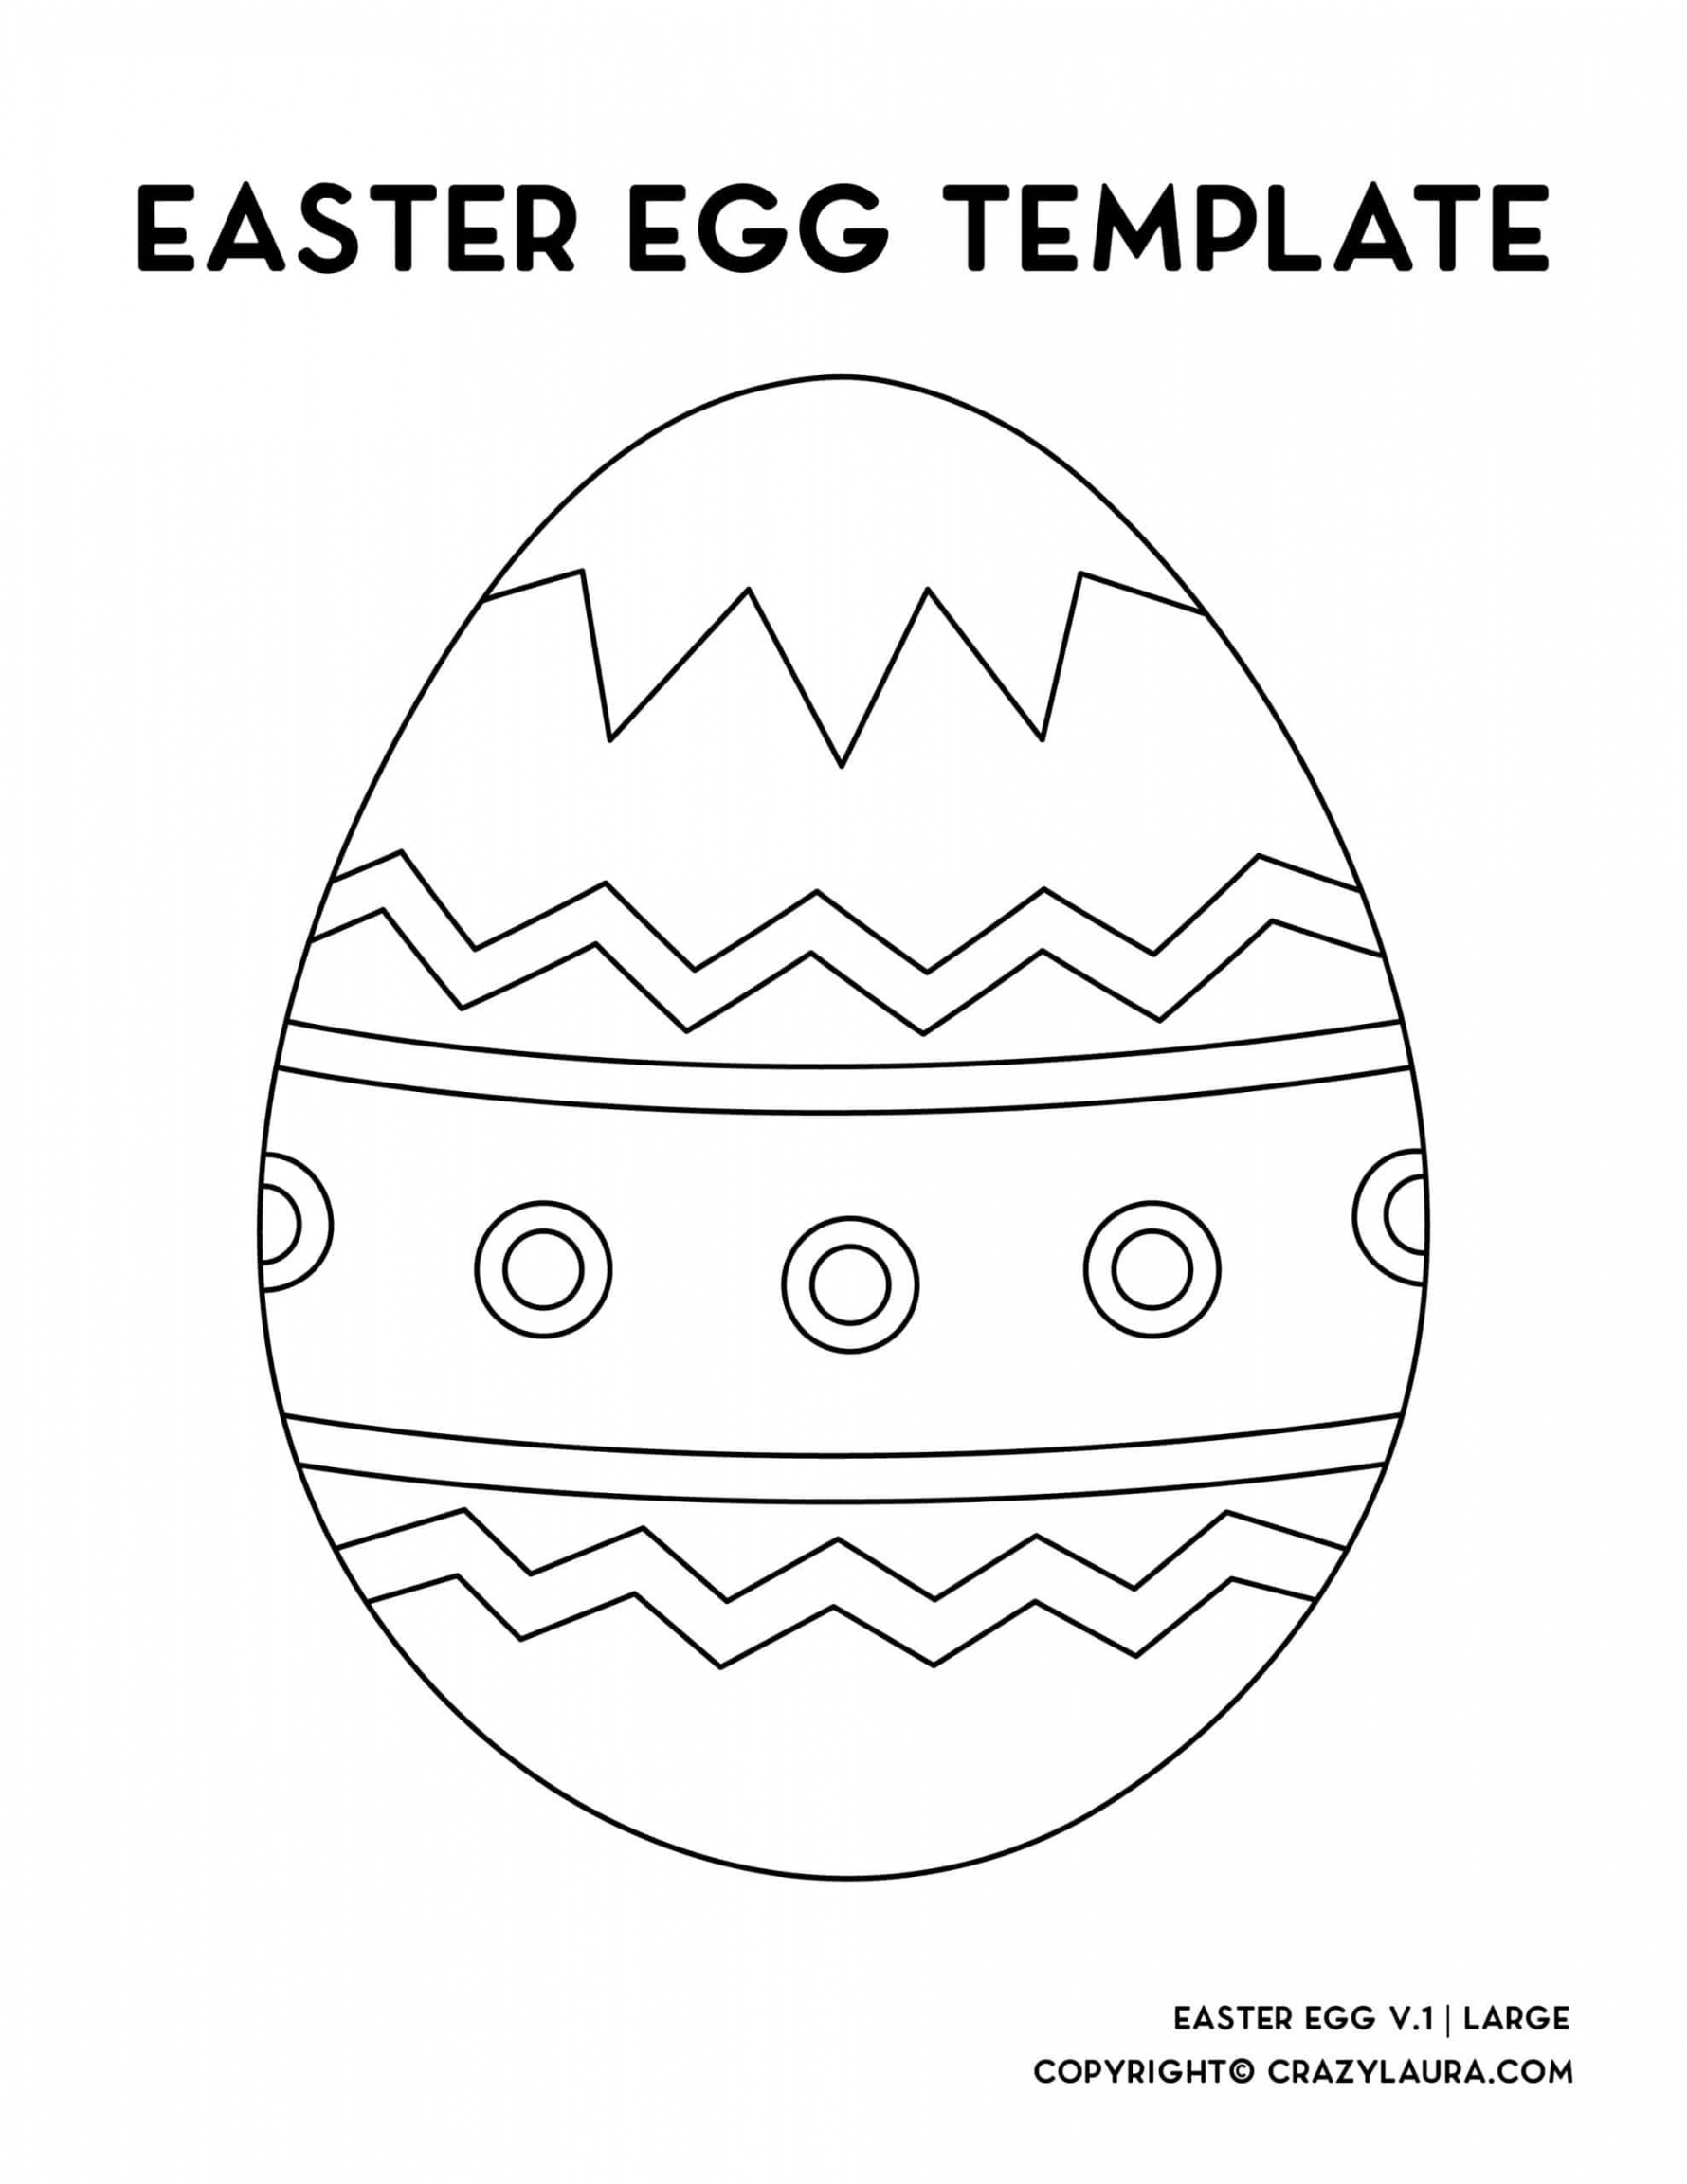 Free Easter Egg Template & Coloring Pages For - FREE Printables - Free Printable Easter Templates